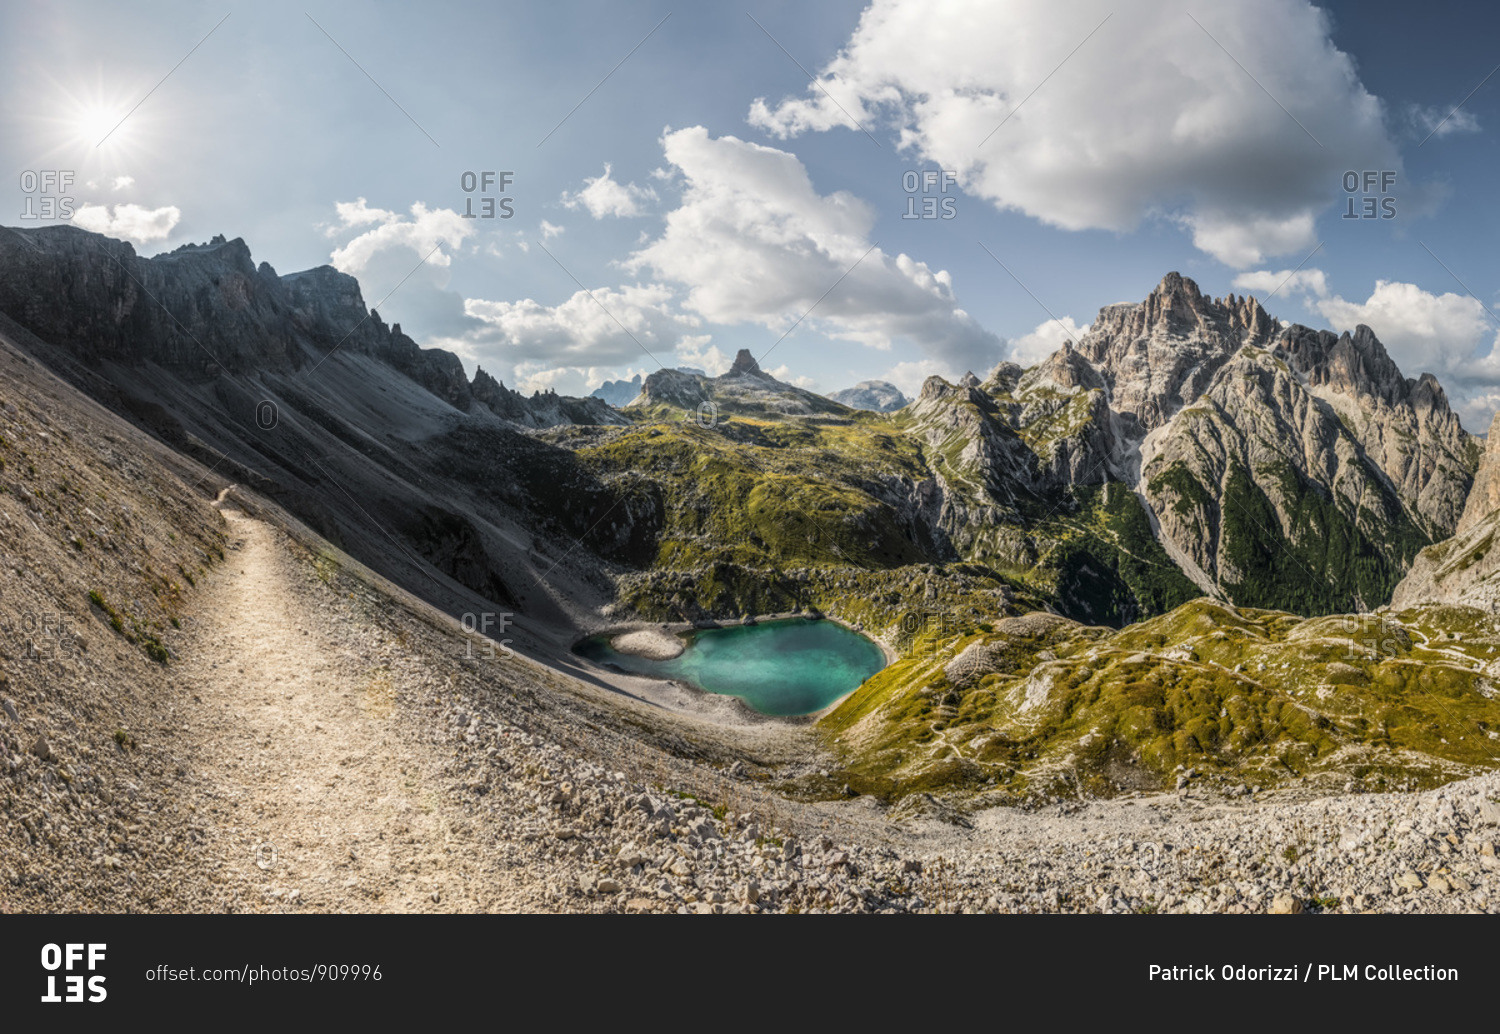 The Piani lakes with Mount Paterno on the left, the Toblin tower in the center and the Crodoni di San Candido on the right, Tre Cime natural park, dolomites, South Tyrol, Italy, Europe